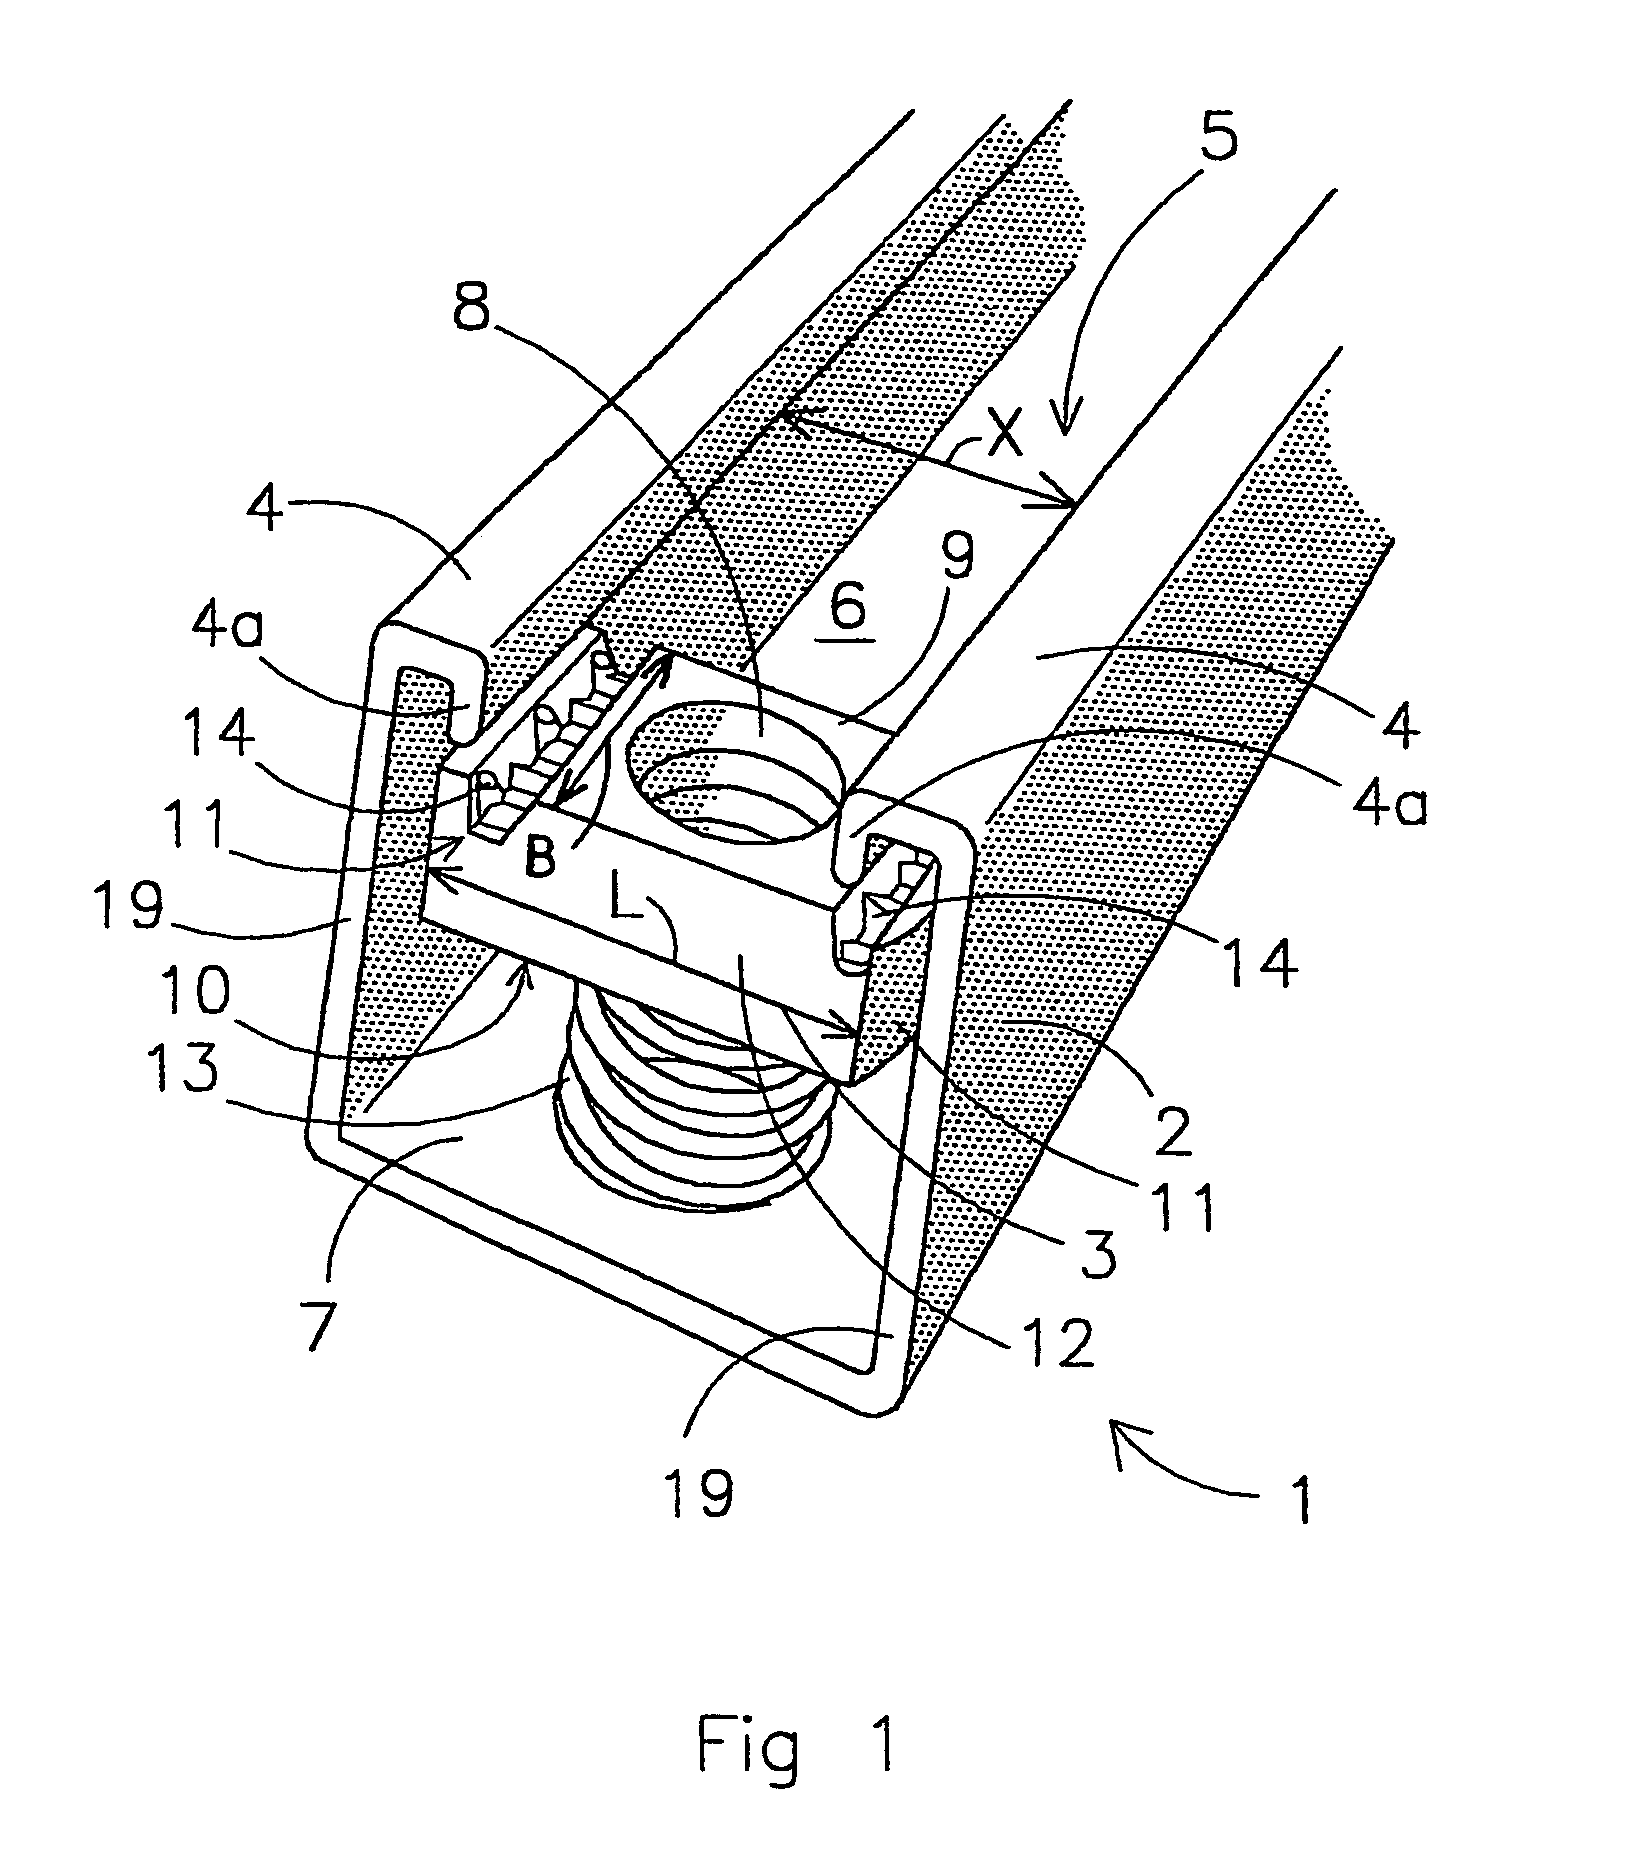 Assembly of a nut body in a profiled-section element